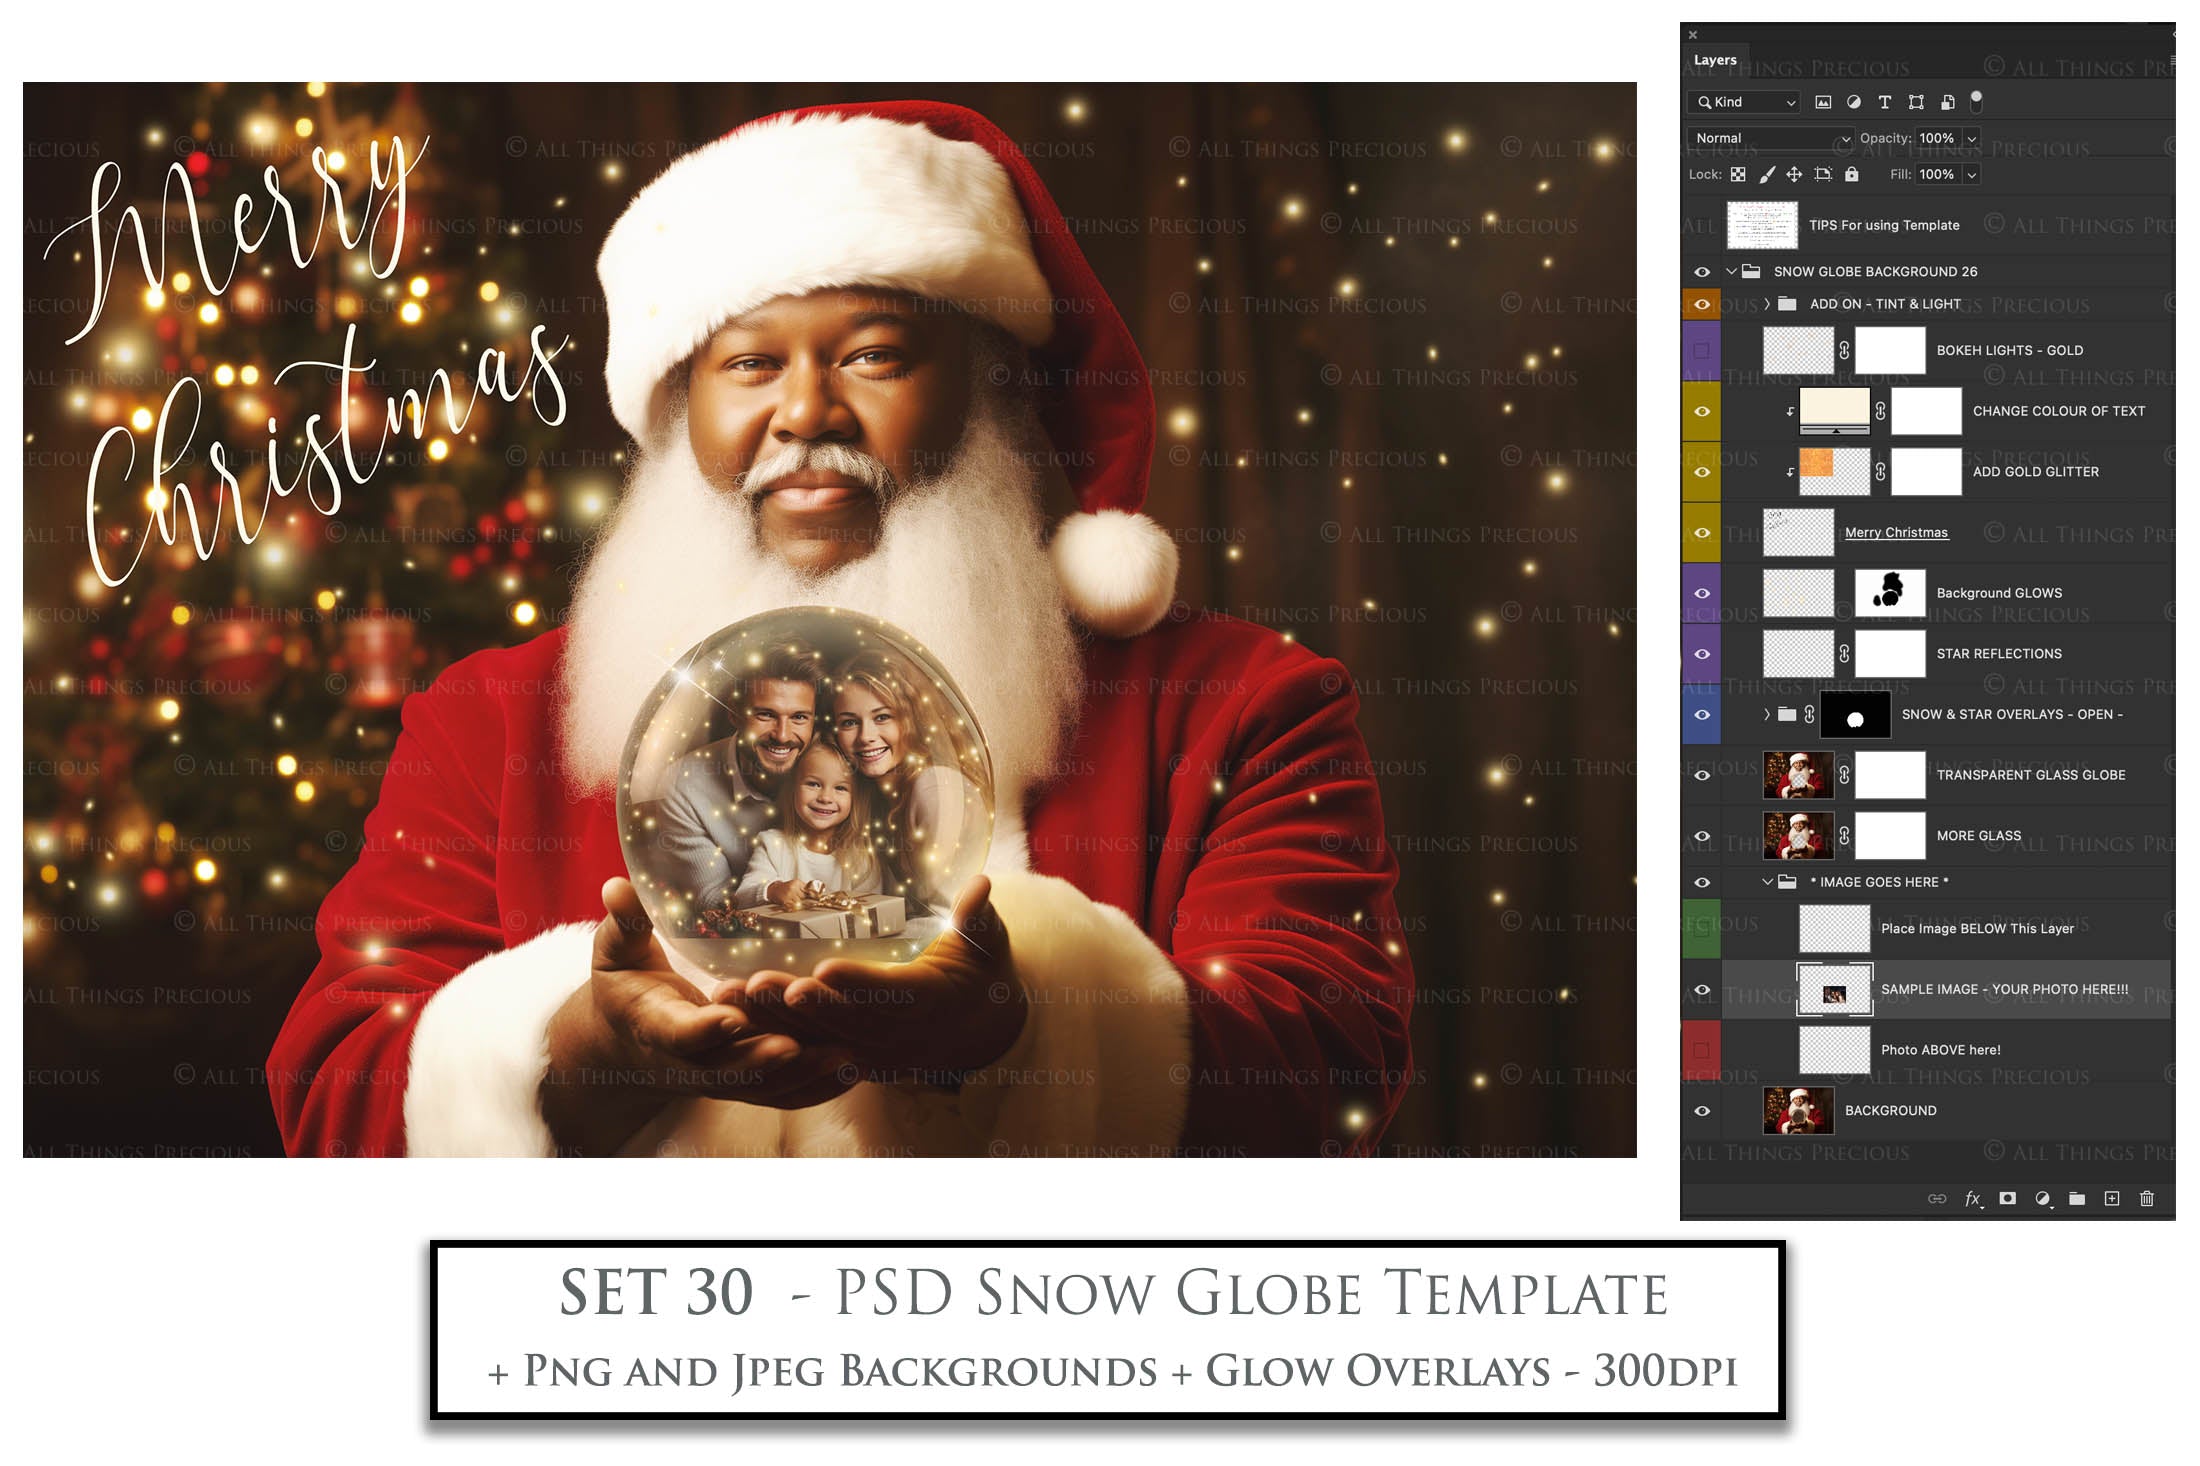 Digital Santa Globe Background, with Png overlays & PSD Template. The globe is transparent, perfect to add images and retain the glass effect. 6000 x 4000, 300dpi. Png Included. Use for Christmas edits, Photography, Card Crafts, Scrapbooking. Xmas Backdrops. African American Black Santa holding a glass ball.